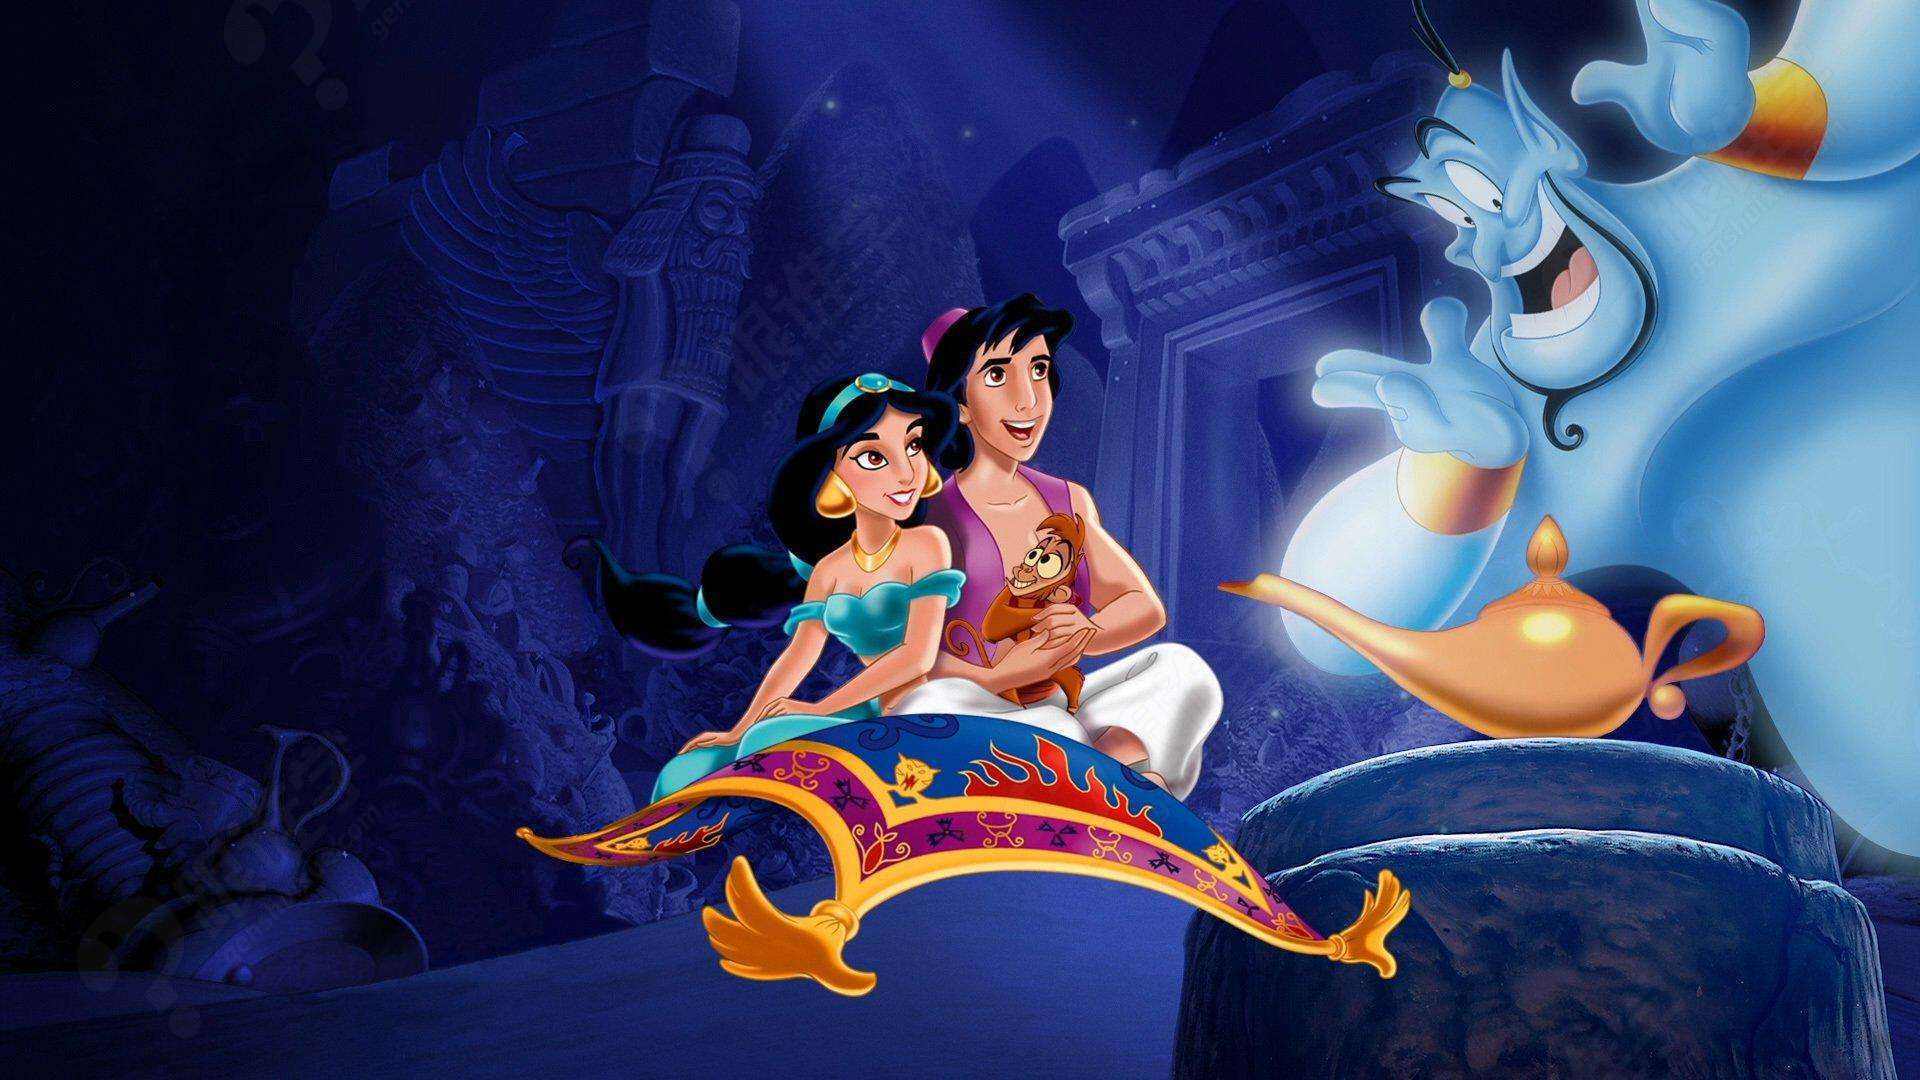 Choose your favorite character at Aladdin